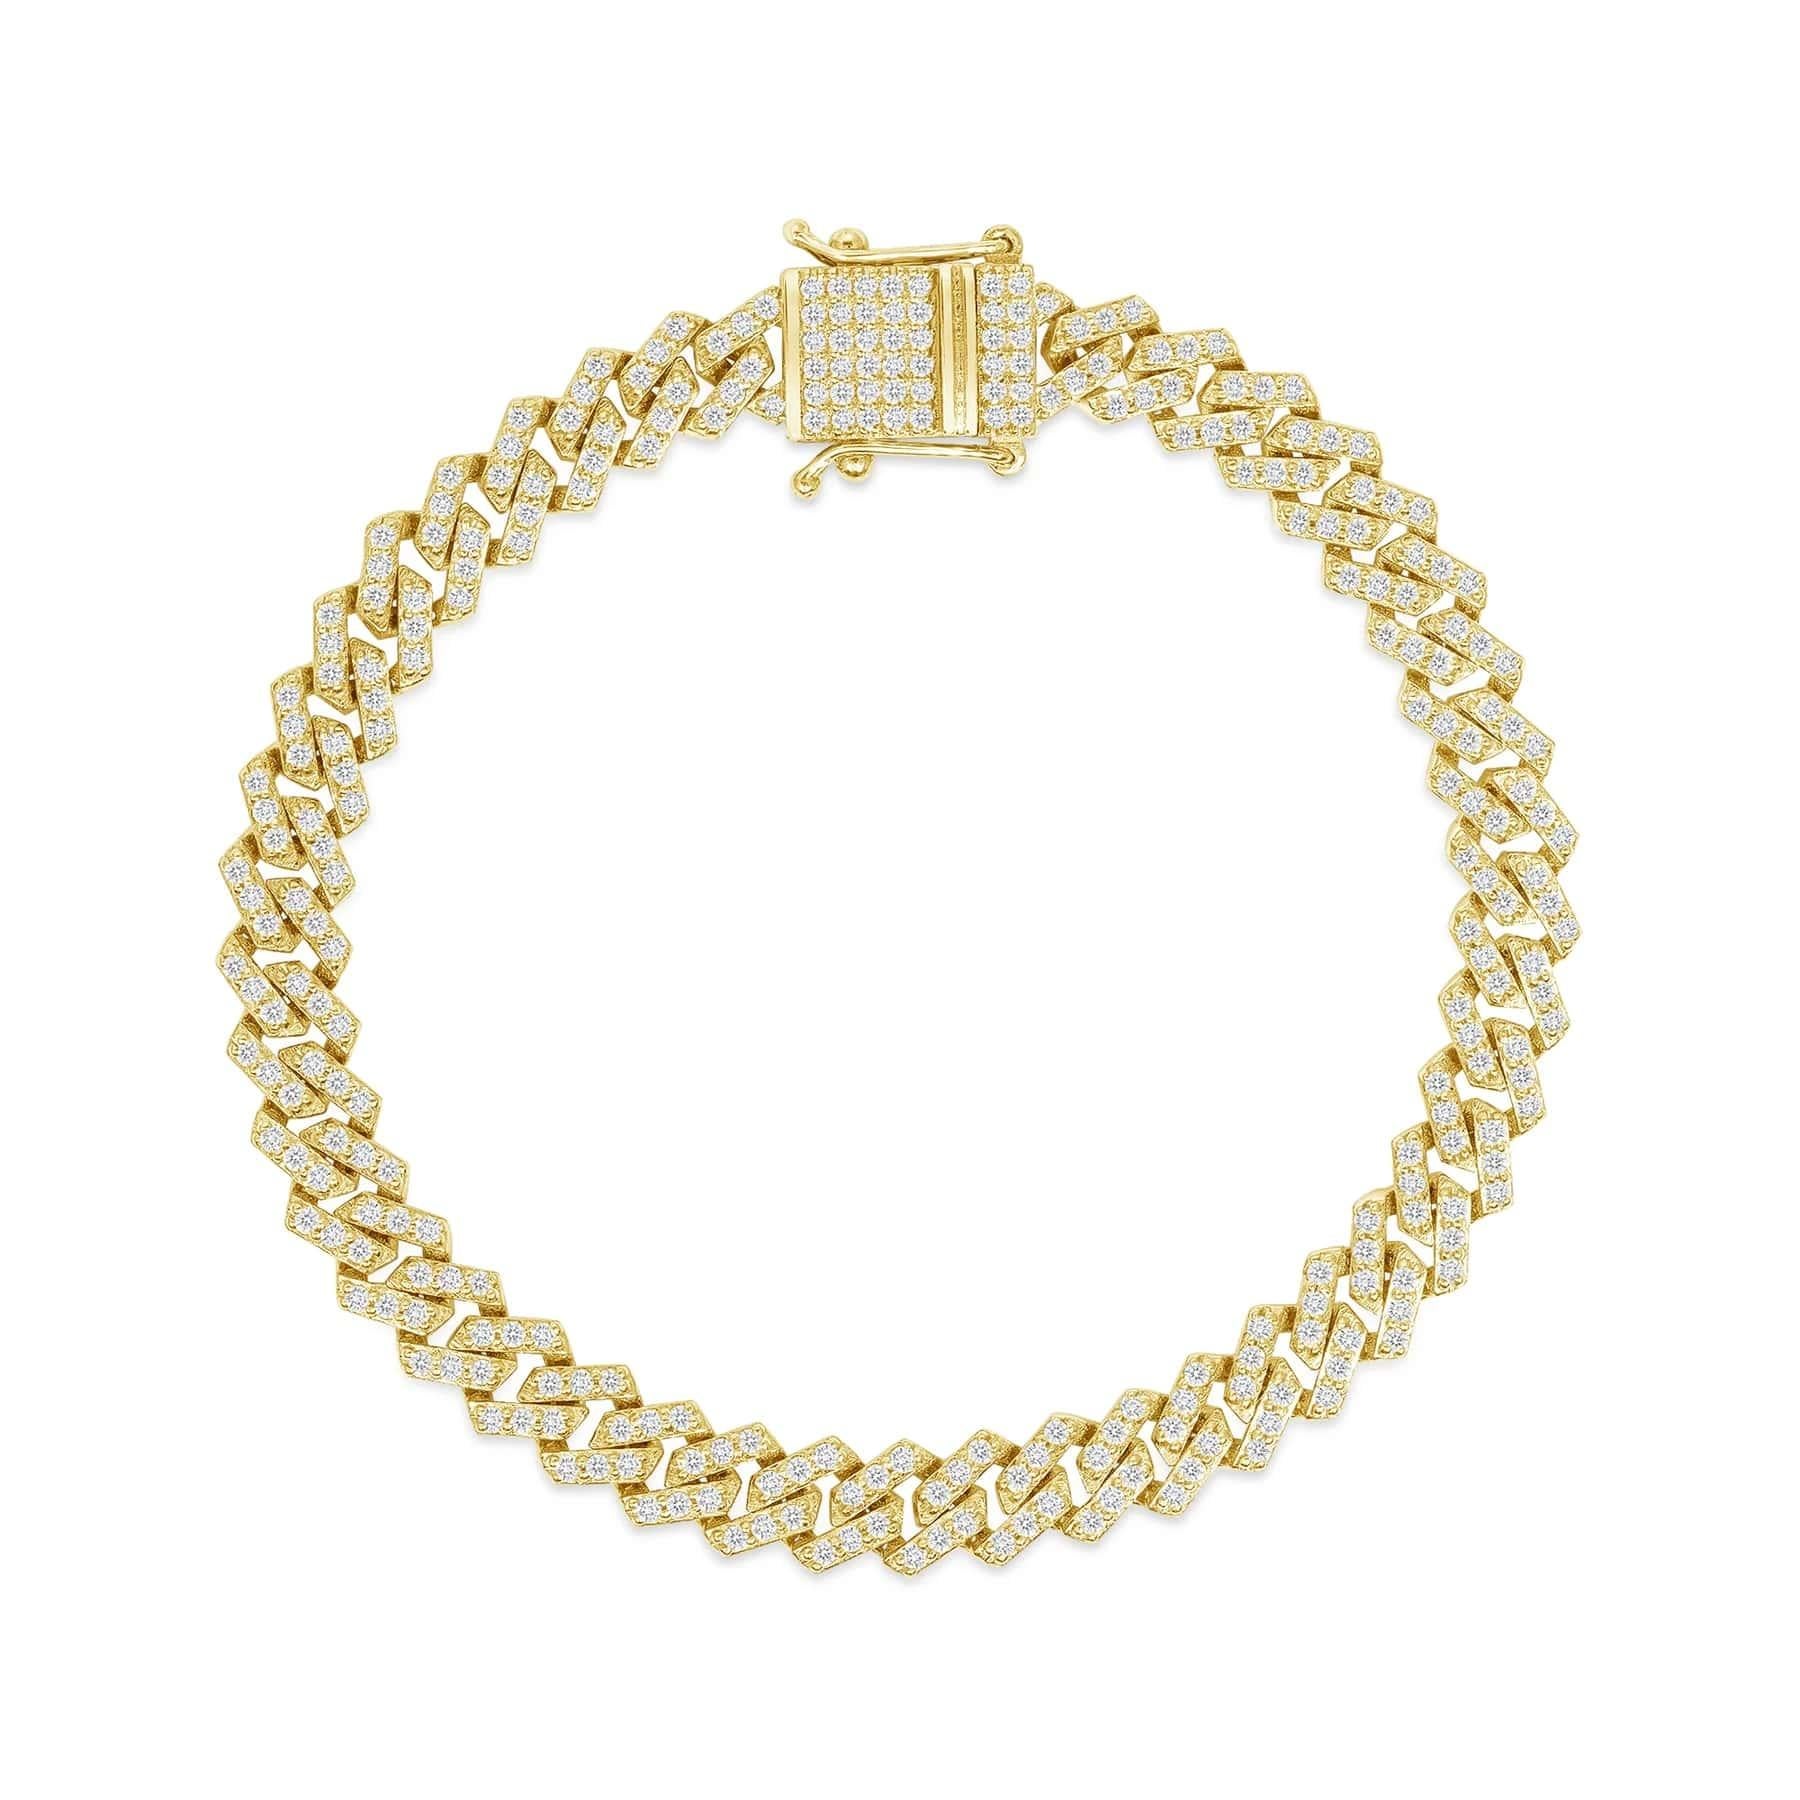 This diamond cuban bracelet compliments any outfit and shines in every setting. 

Bracelet Information
Metal : 14k Gold
Color : White Gold, Yellow Gold, Rose Gold
Diamond Cut : Round 
Diamond Carats : 2ct
Diamond Clarity : VS-SI
Diamond Color :